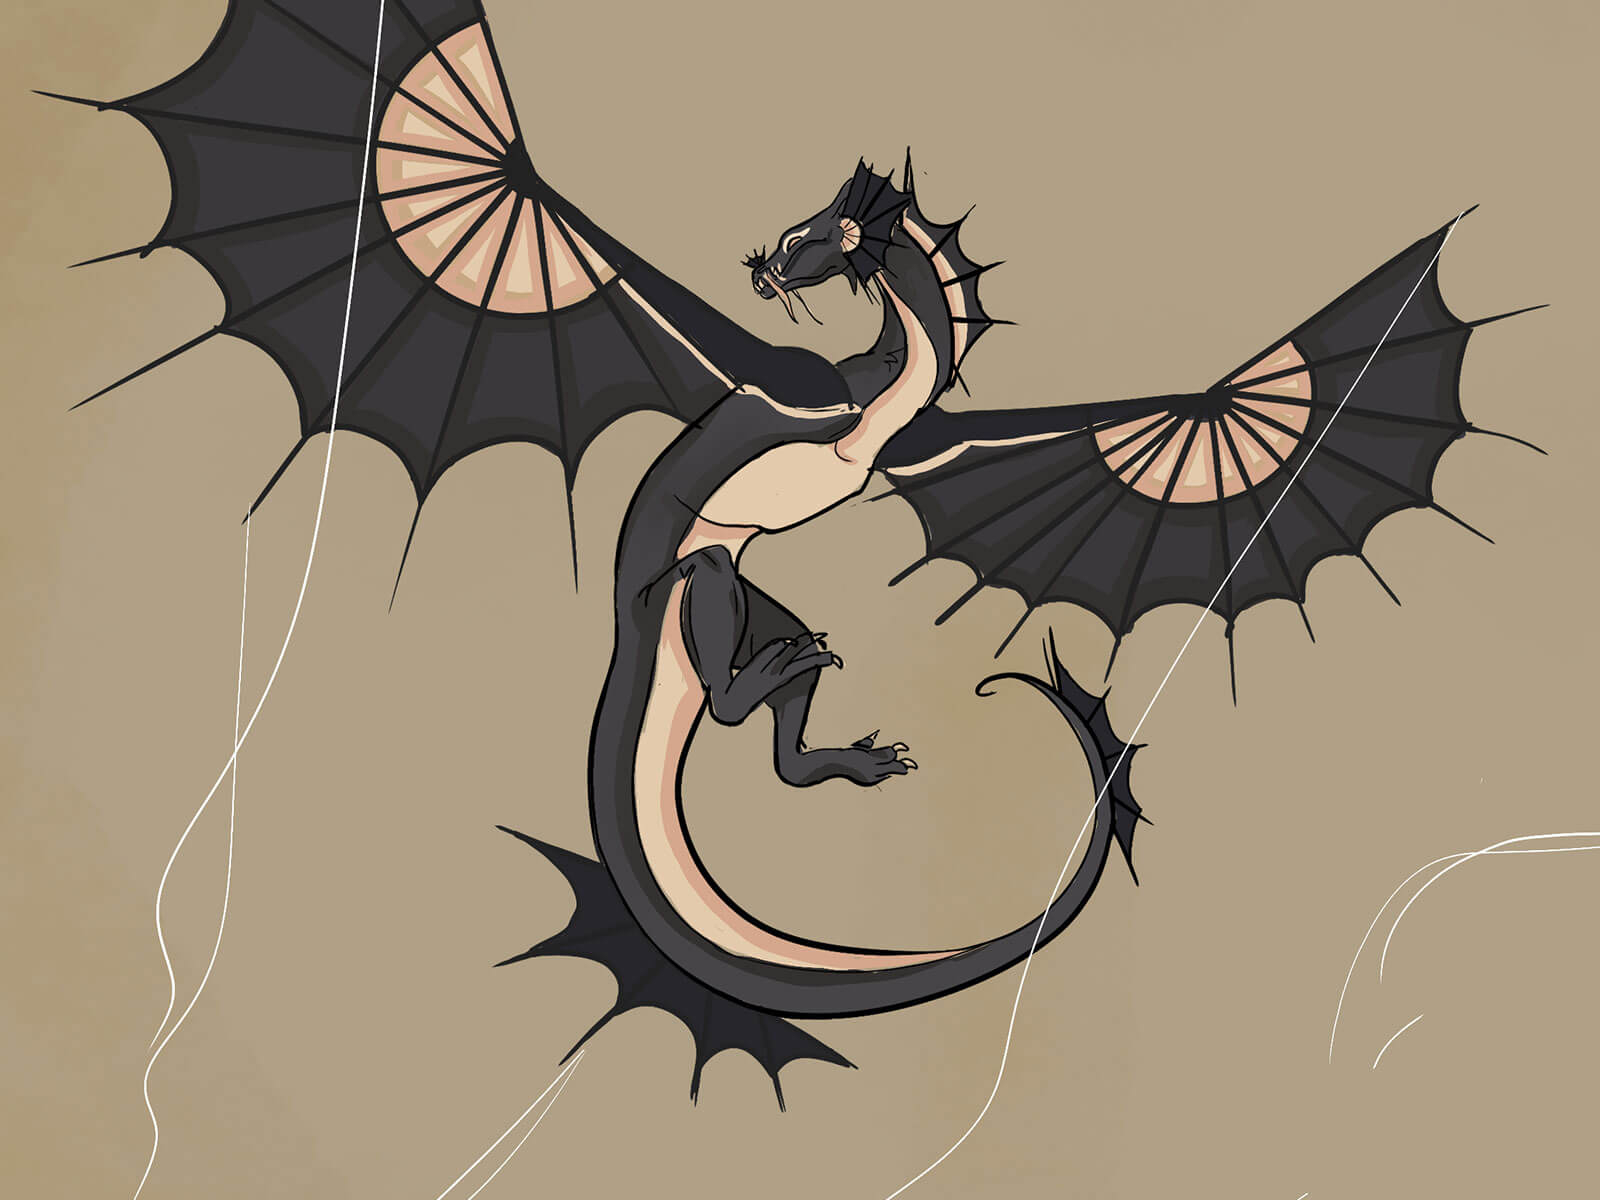 Three paper-fan-styled dragons